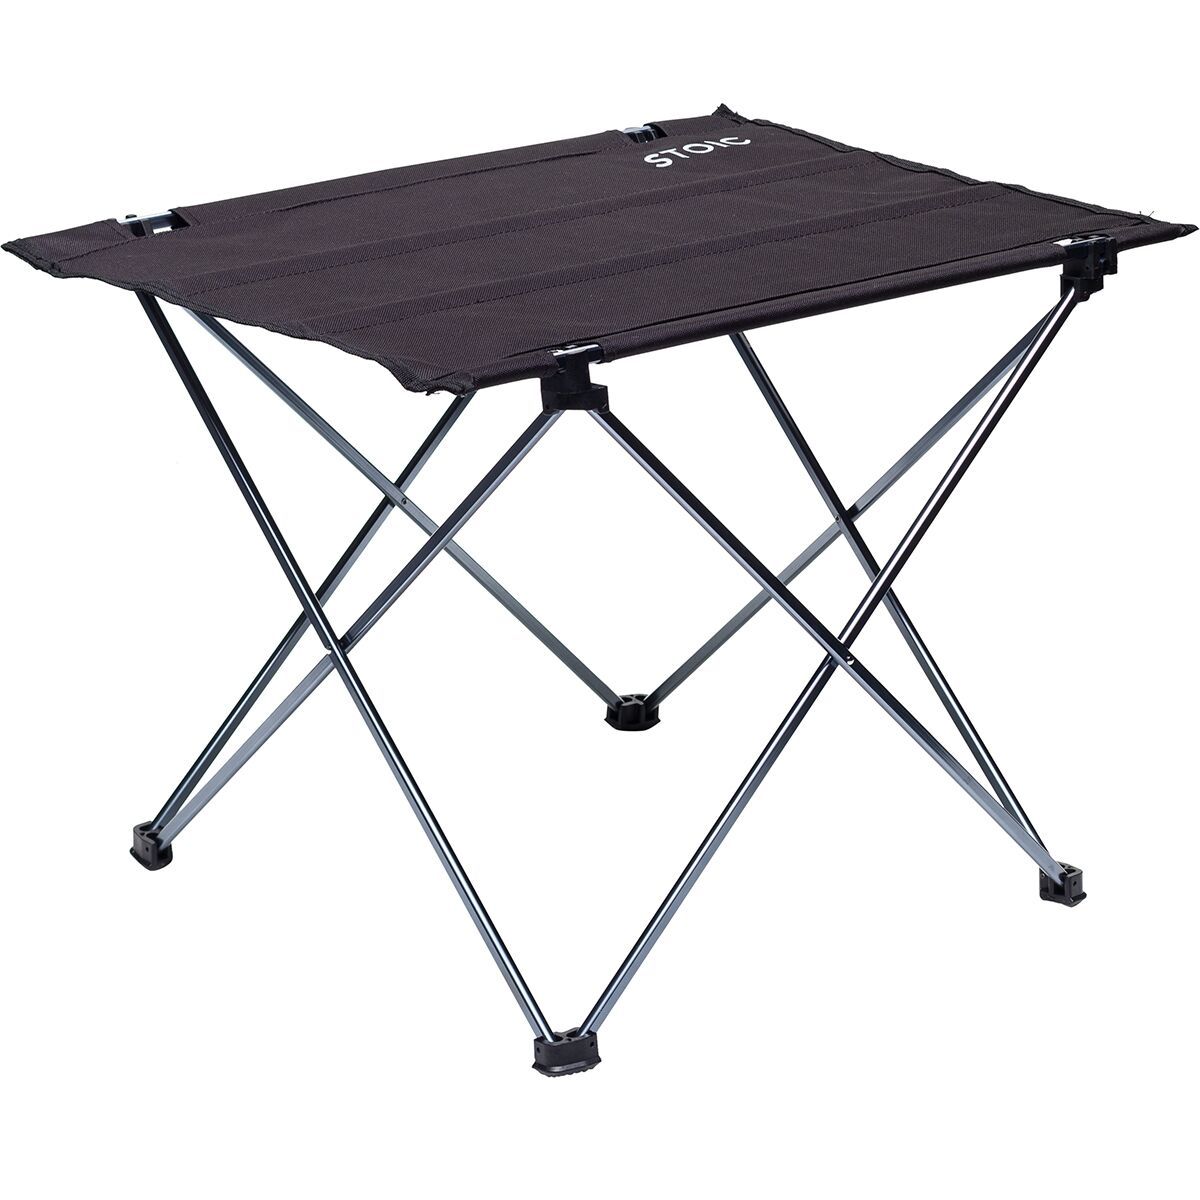 High Quality Light Weigh Folding table Camping Caravan Portable Light weight 